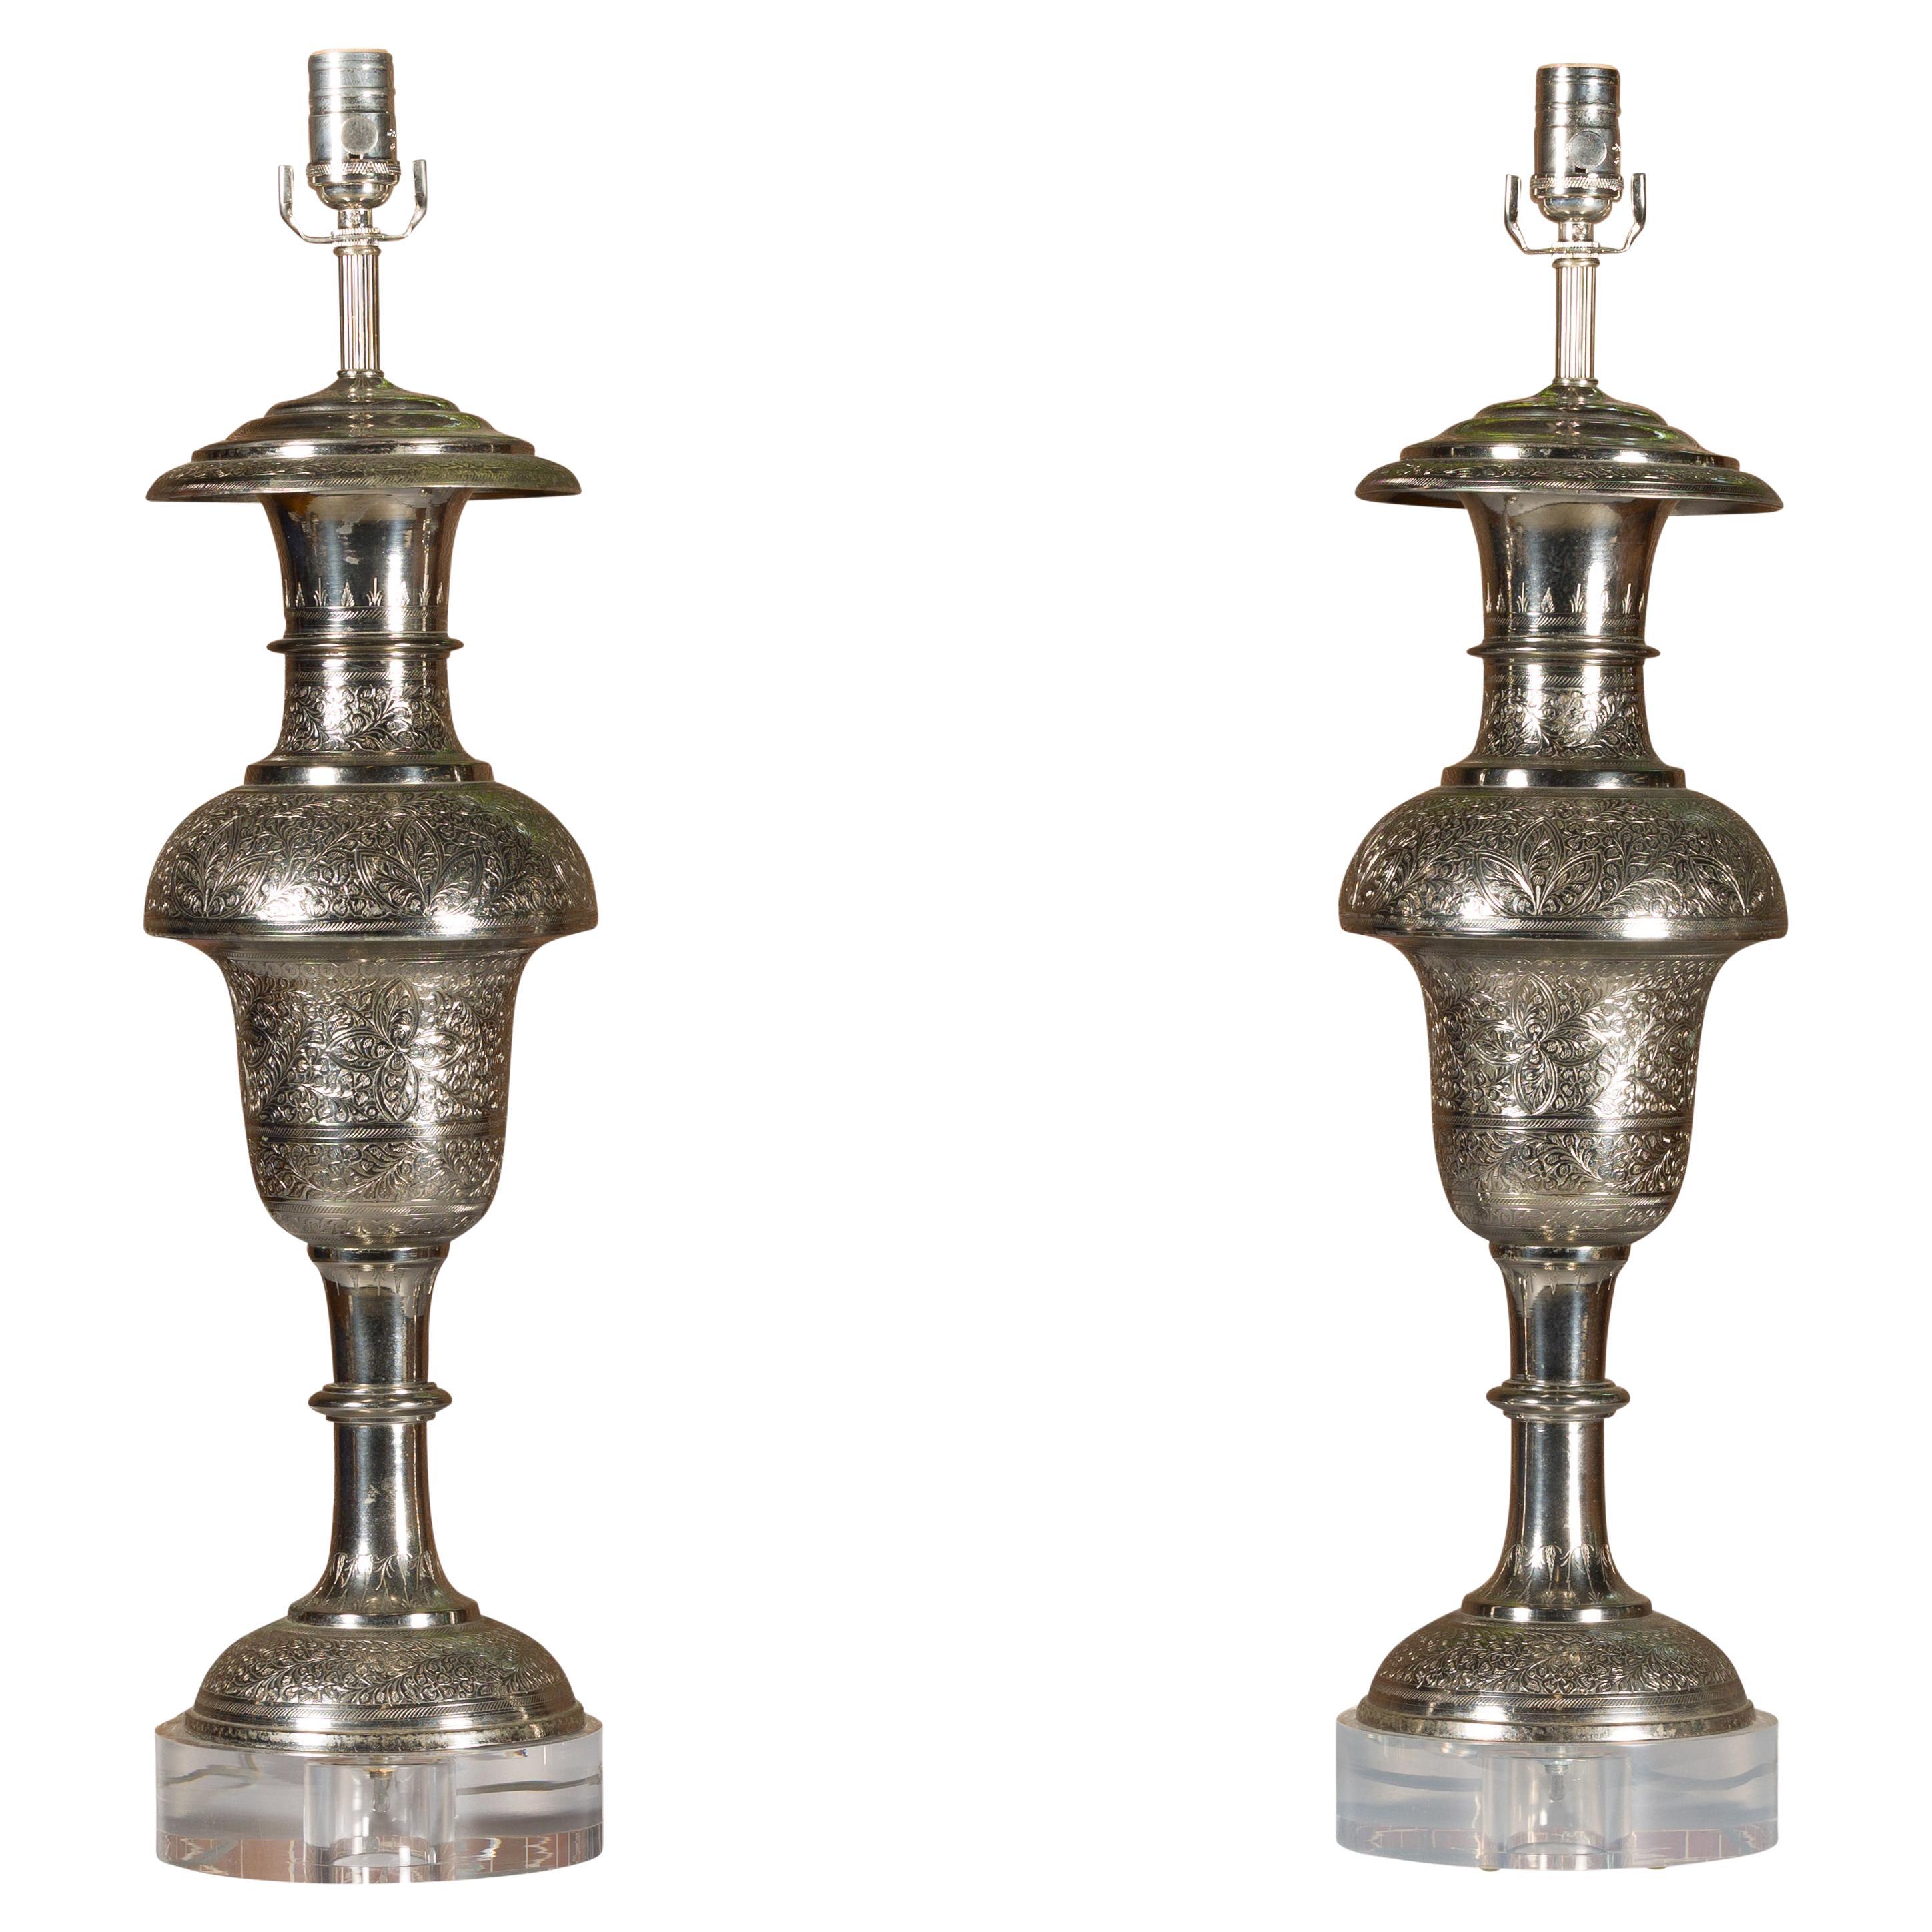 Pair of Moroccan Tôle Lamps on Lucite Bases with Etched Floral Décor, Midcentury